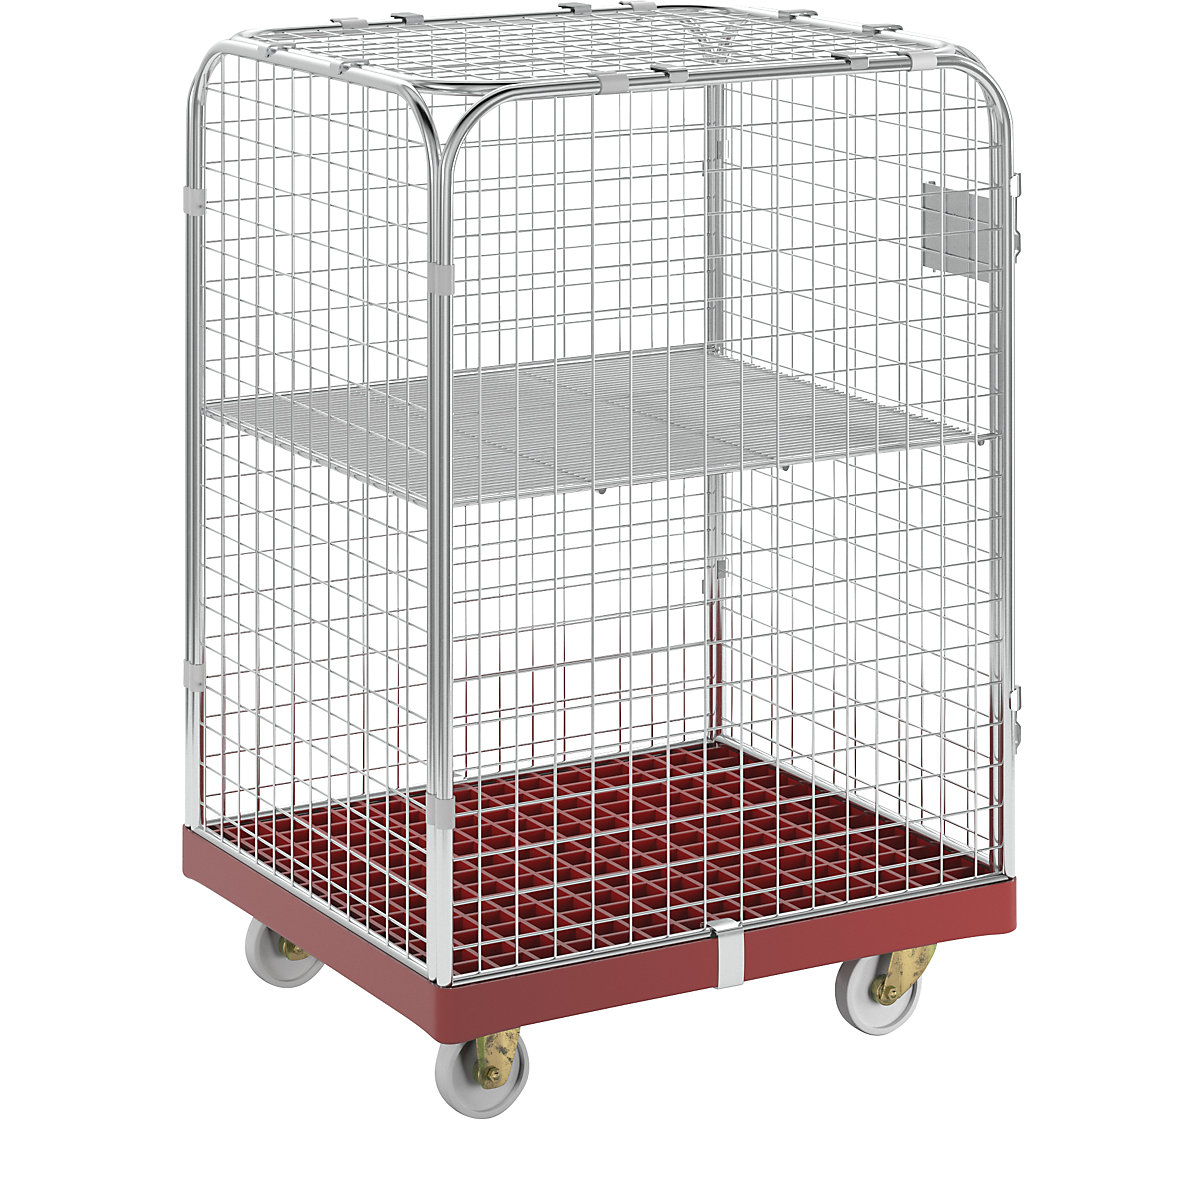 SAFE roll container, HxWxD 1200 x 720 x 810 mm, red transport dolly-11